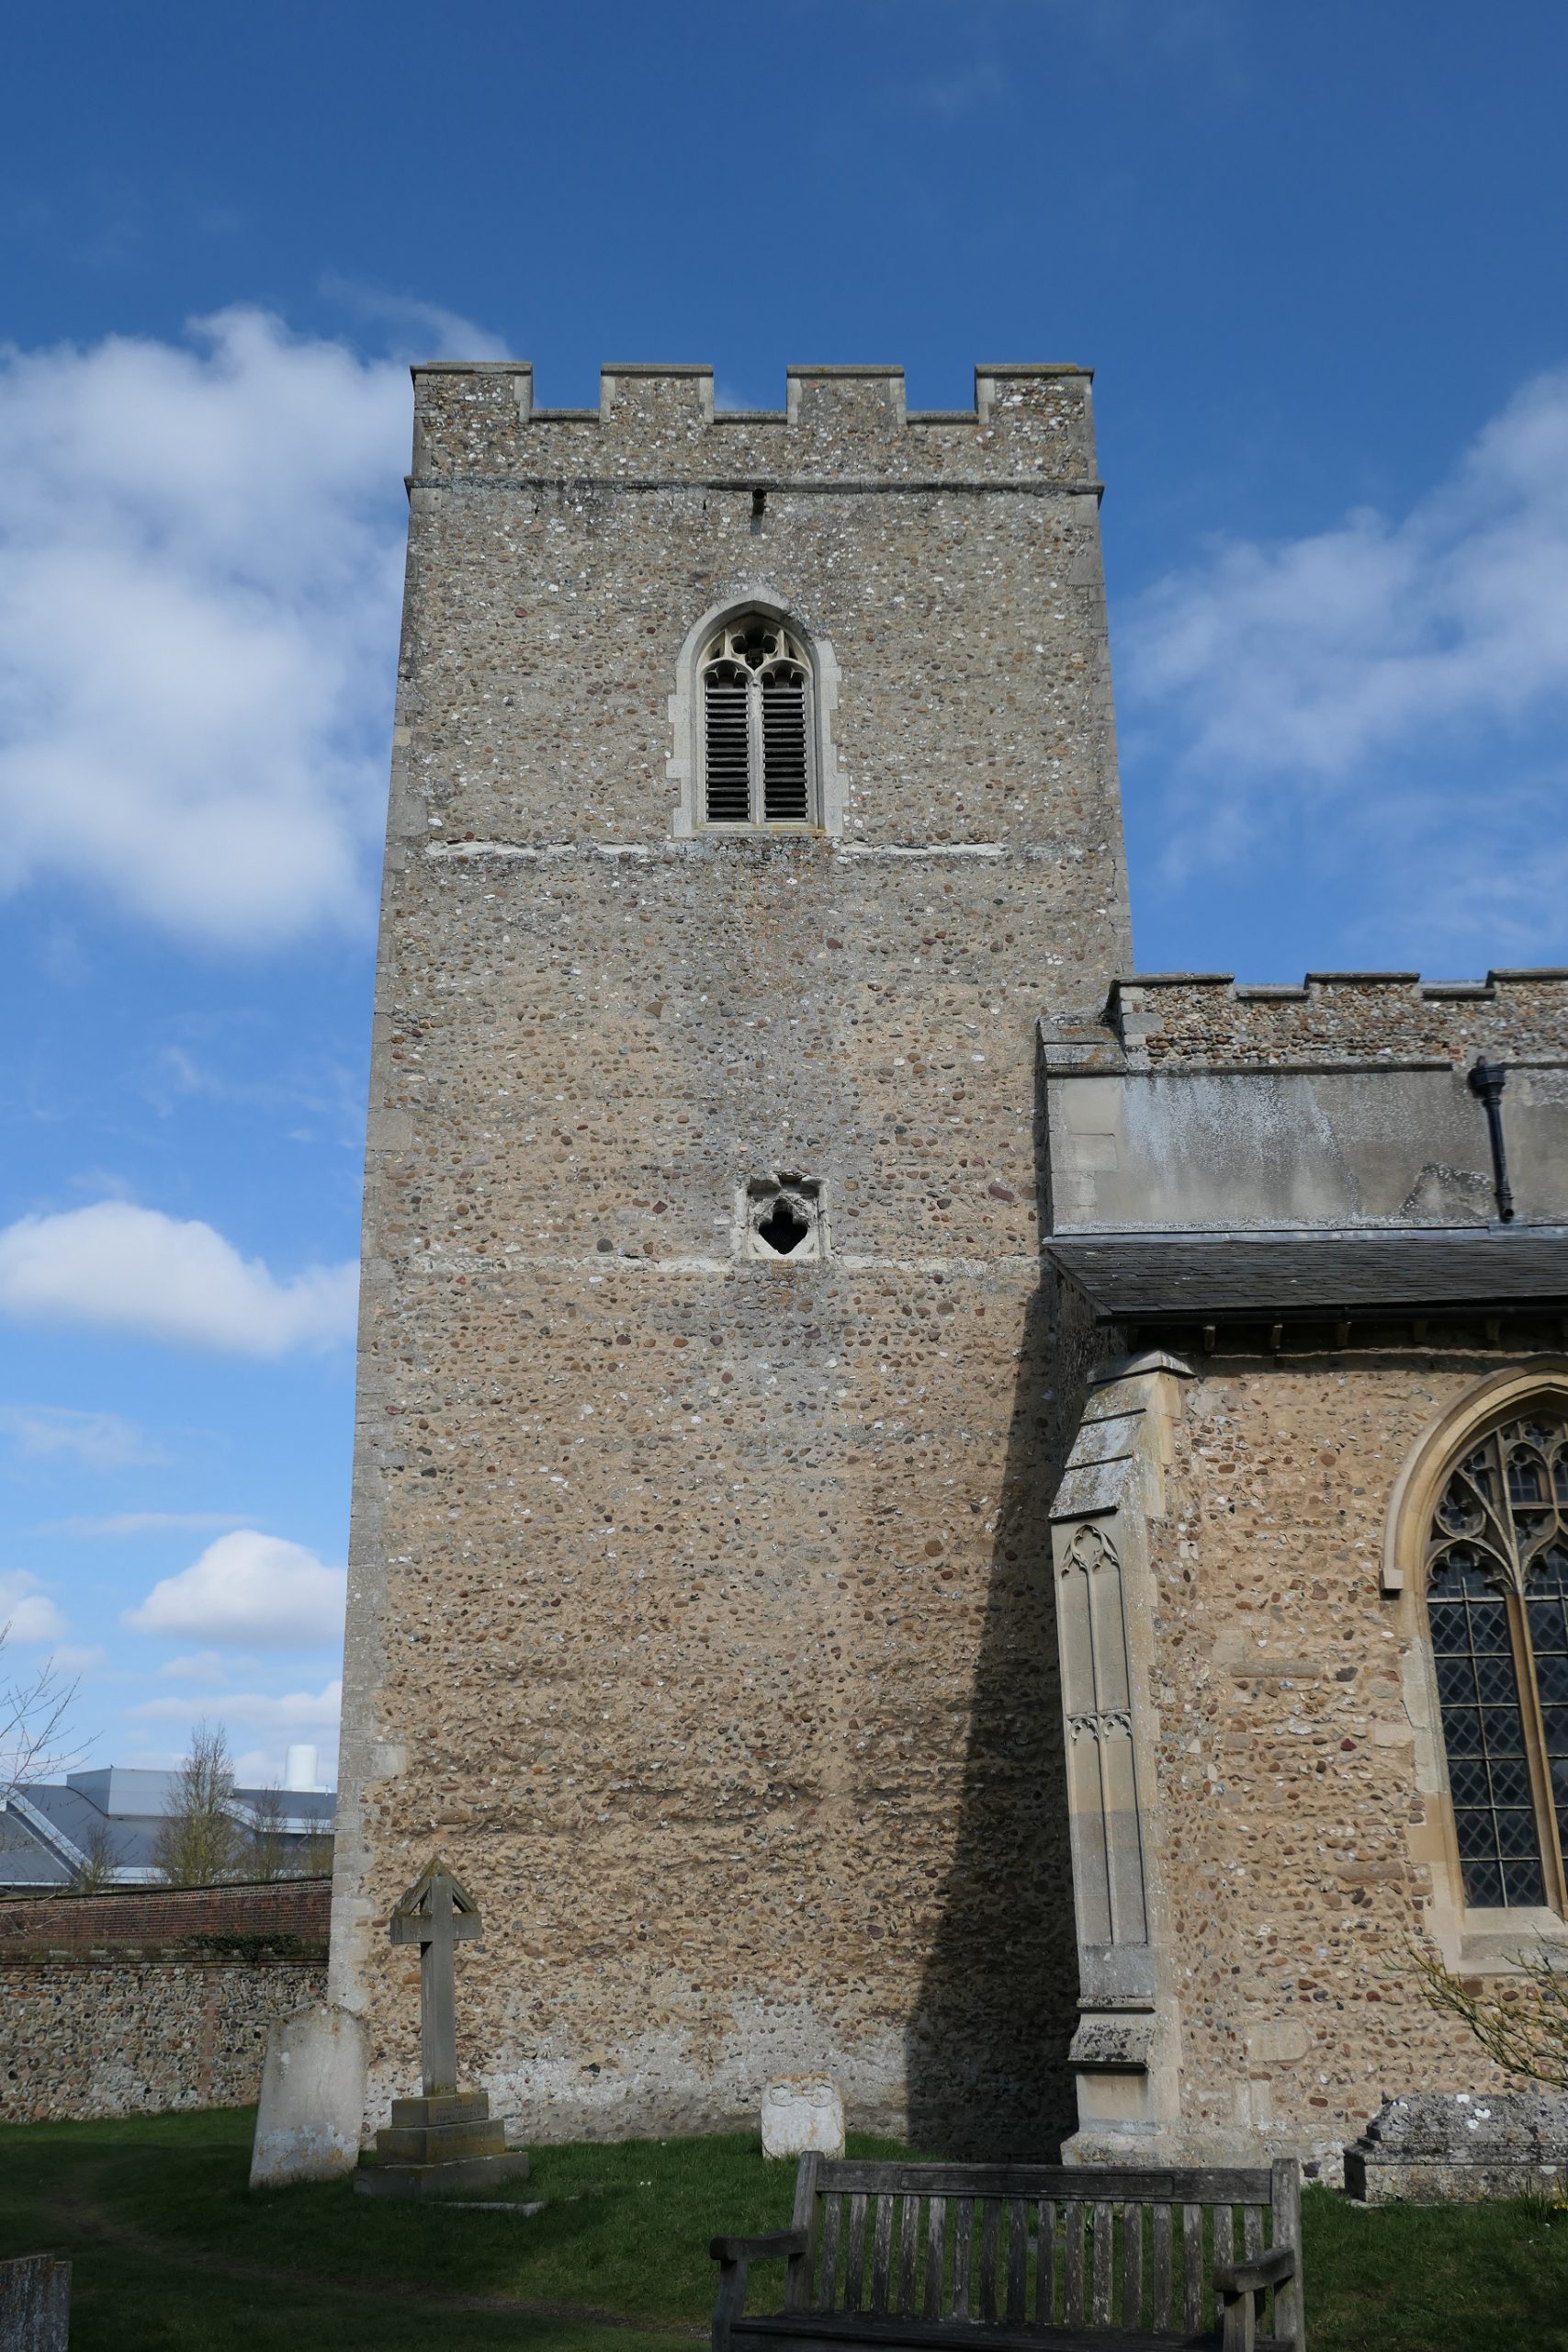 The tower of St Peter's Babraham